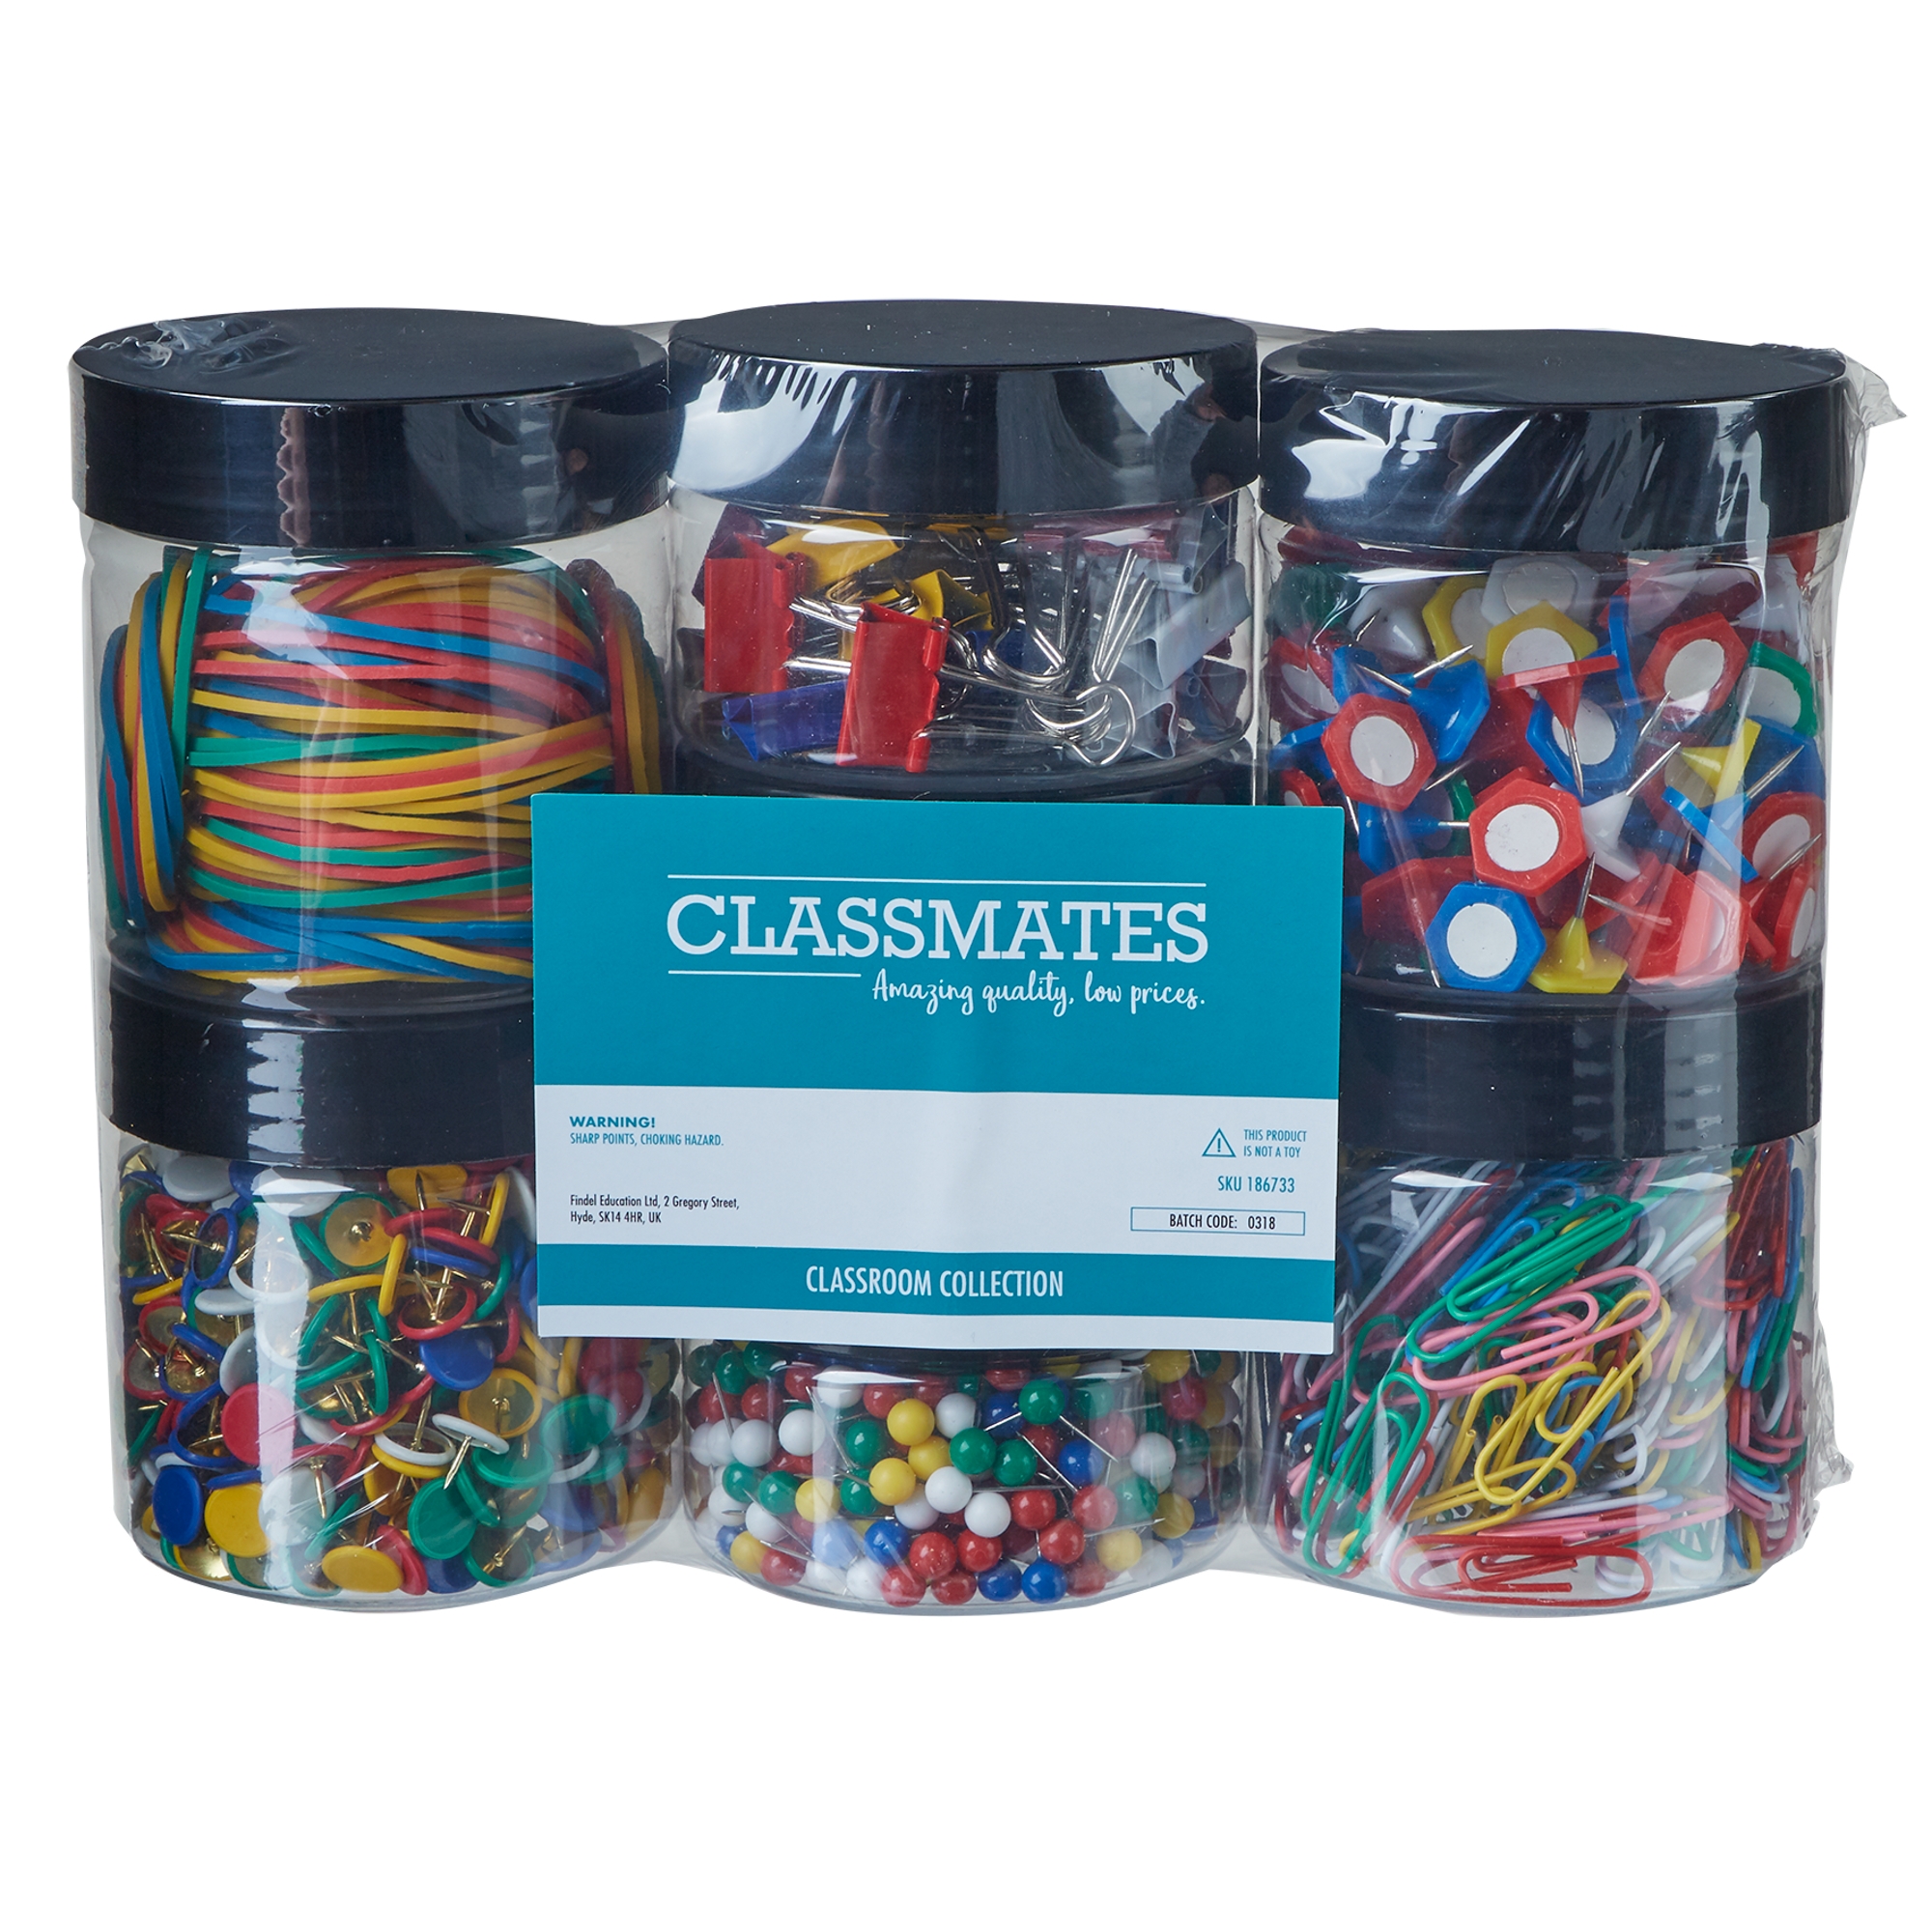 Classmates Stationery Pack - Pack of 6